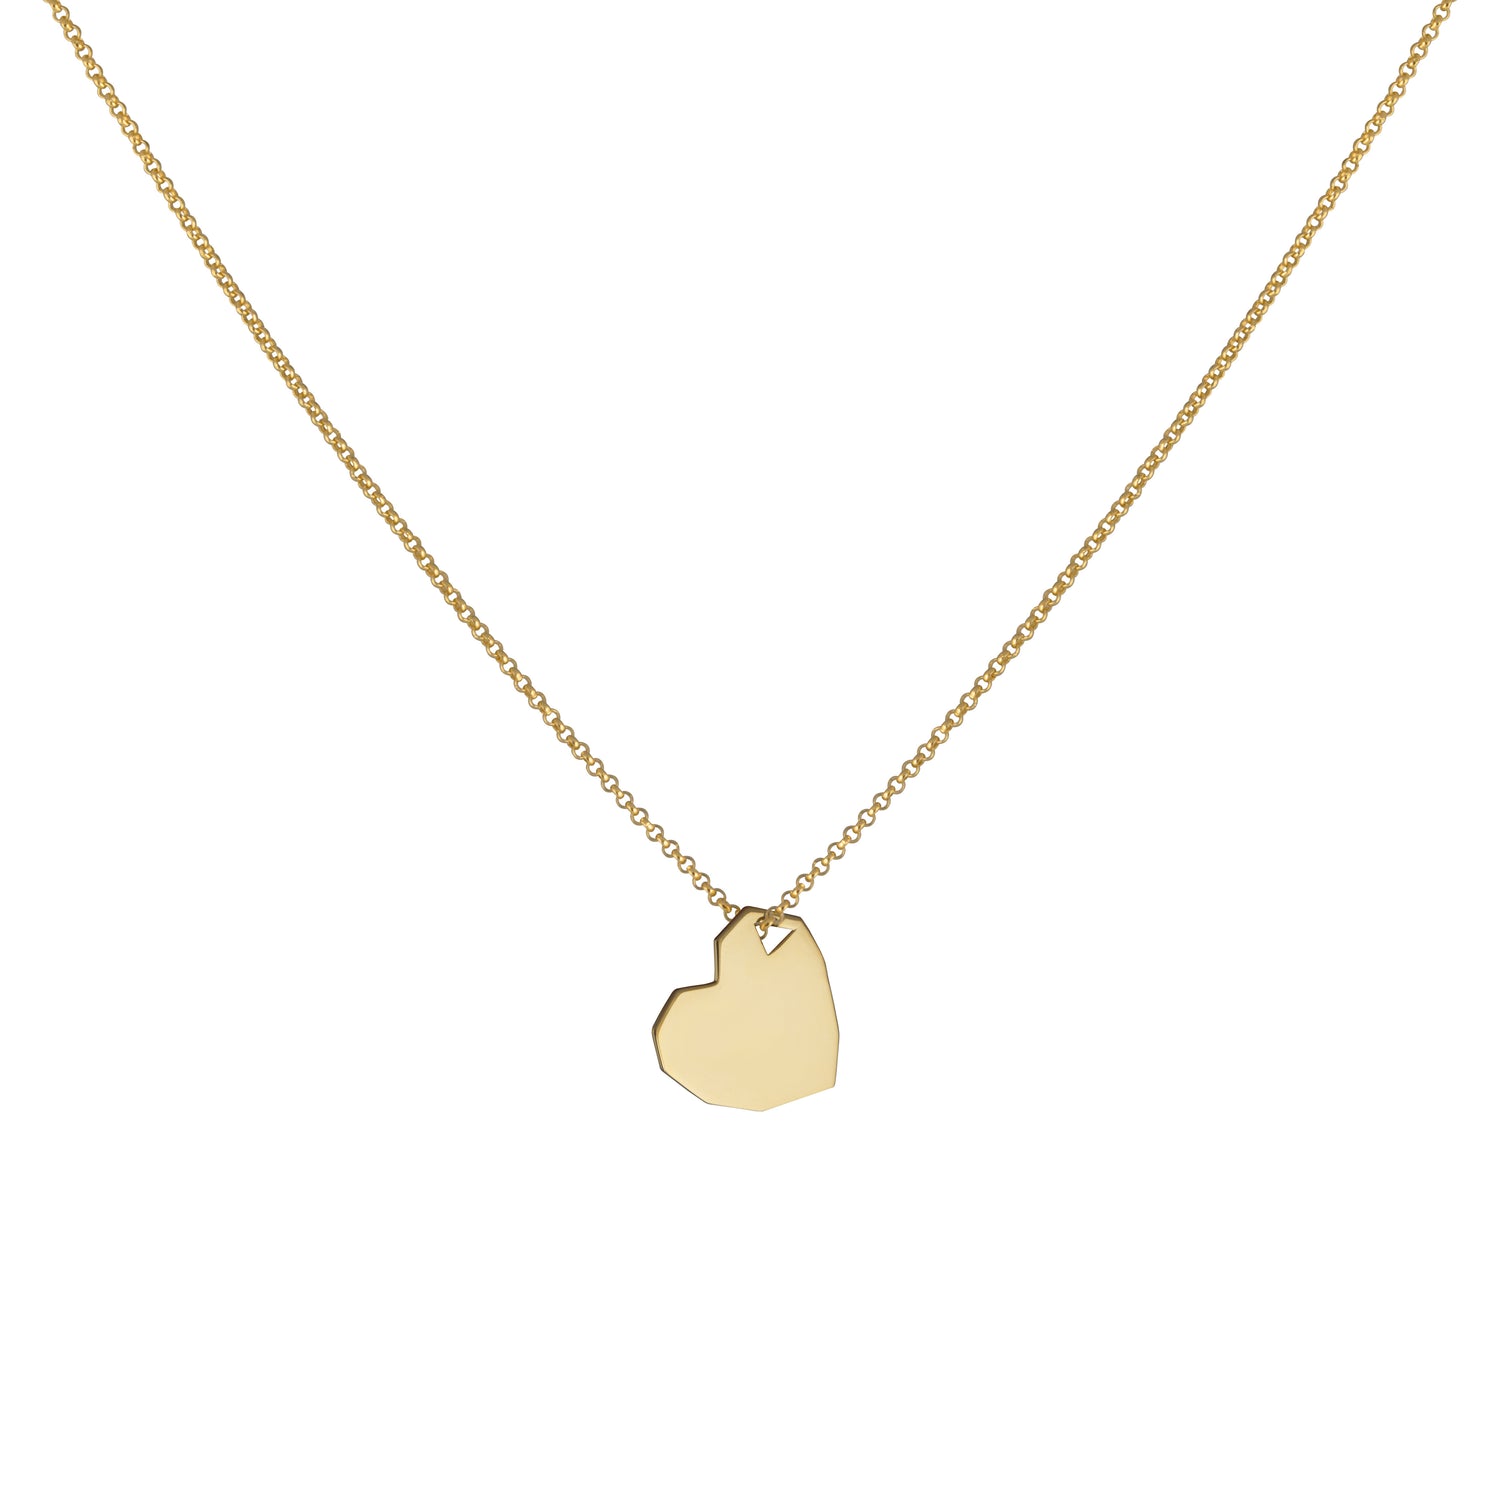 Popular Love necklace with a heart pendant from Facet collection.   Material: 18 karat gold-plated silver.  Size: 45cm. 